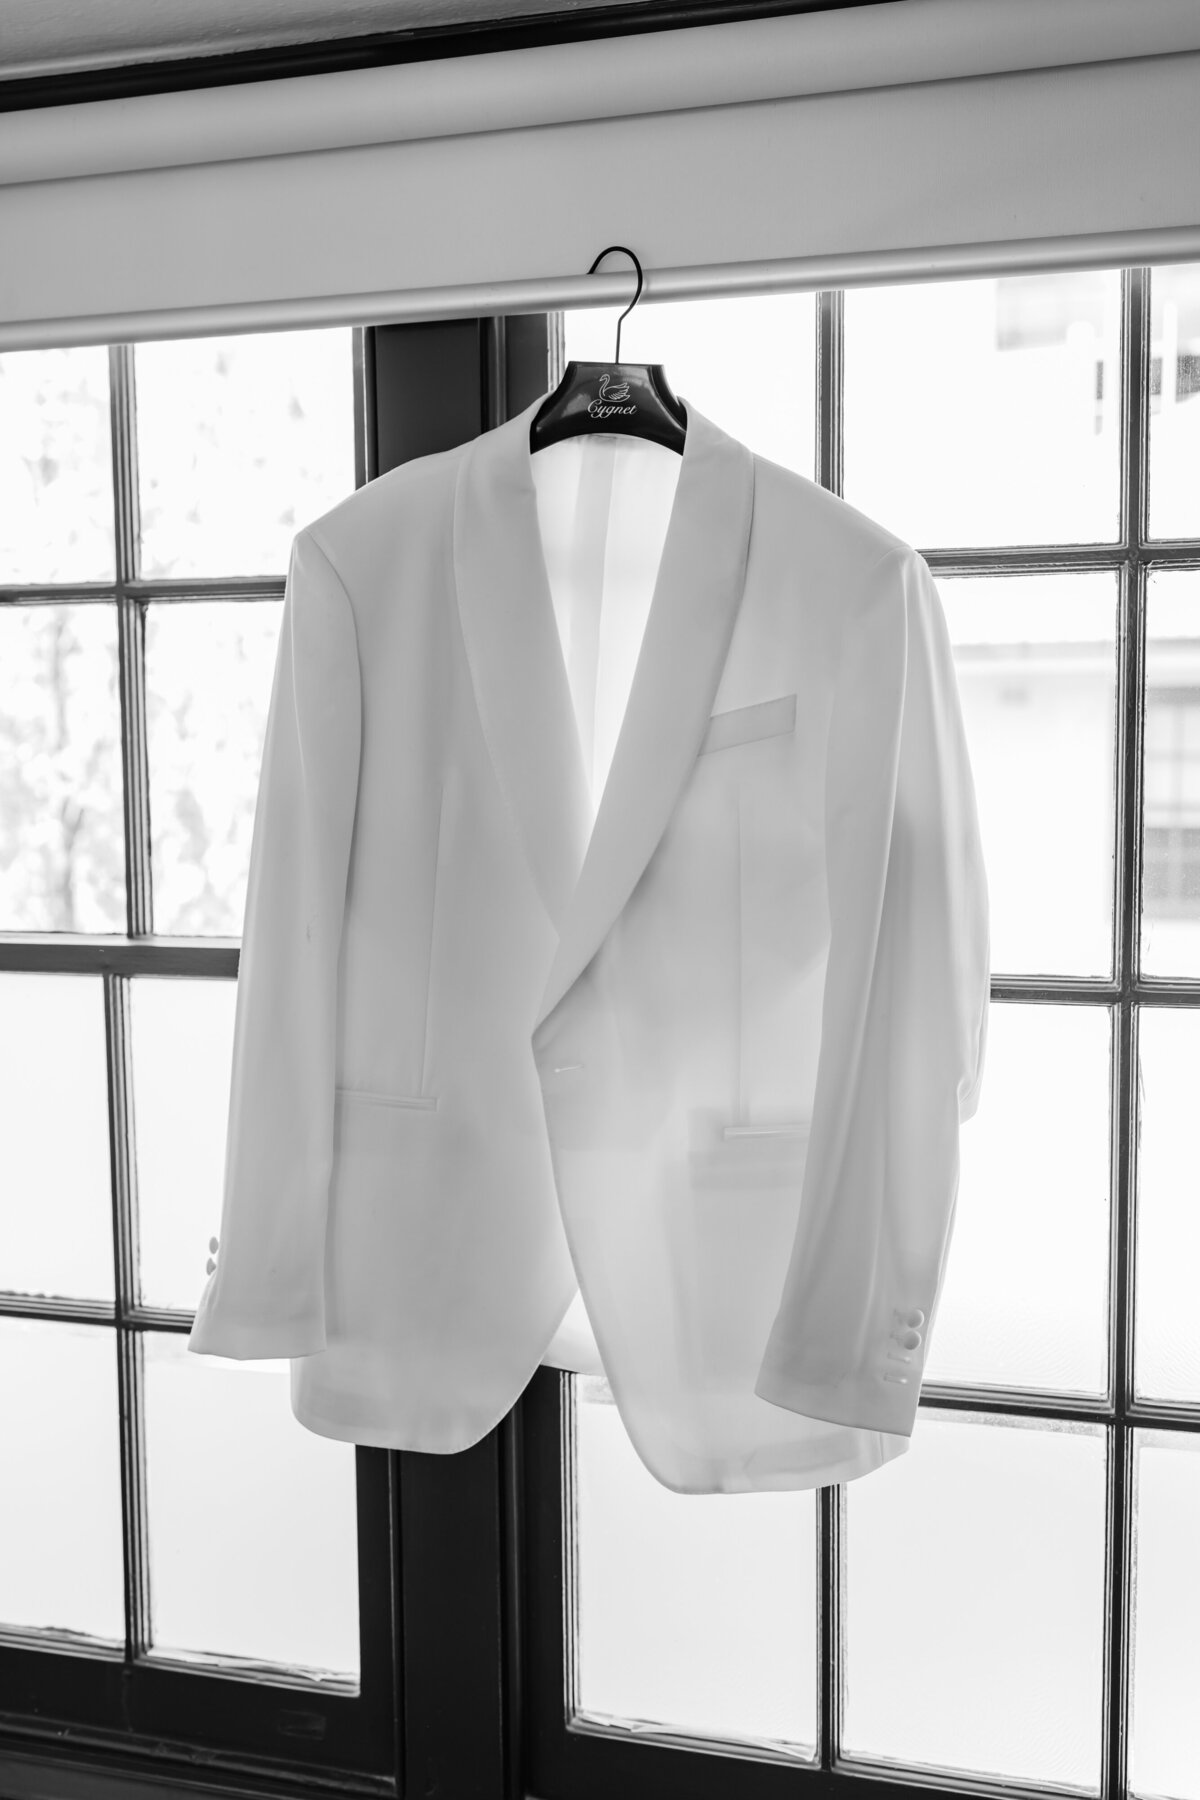 White groom suit hanging in the window